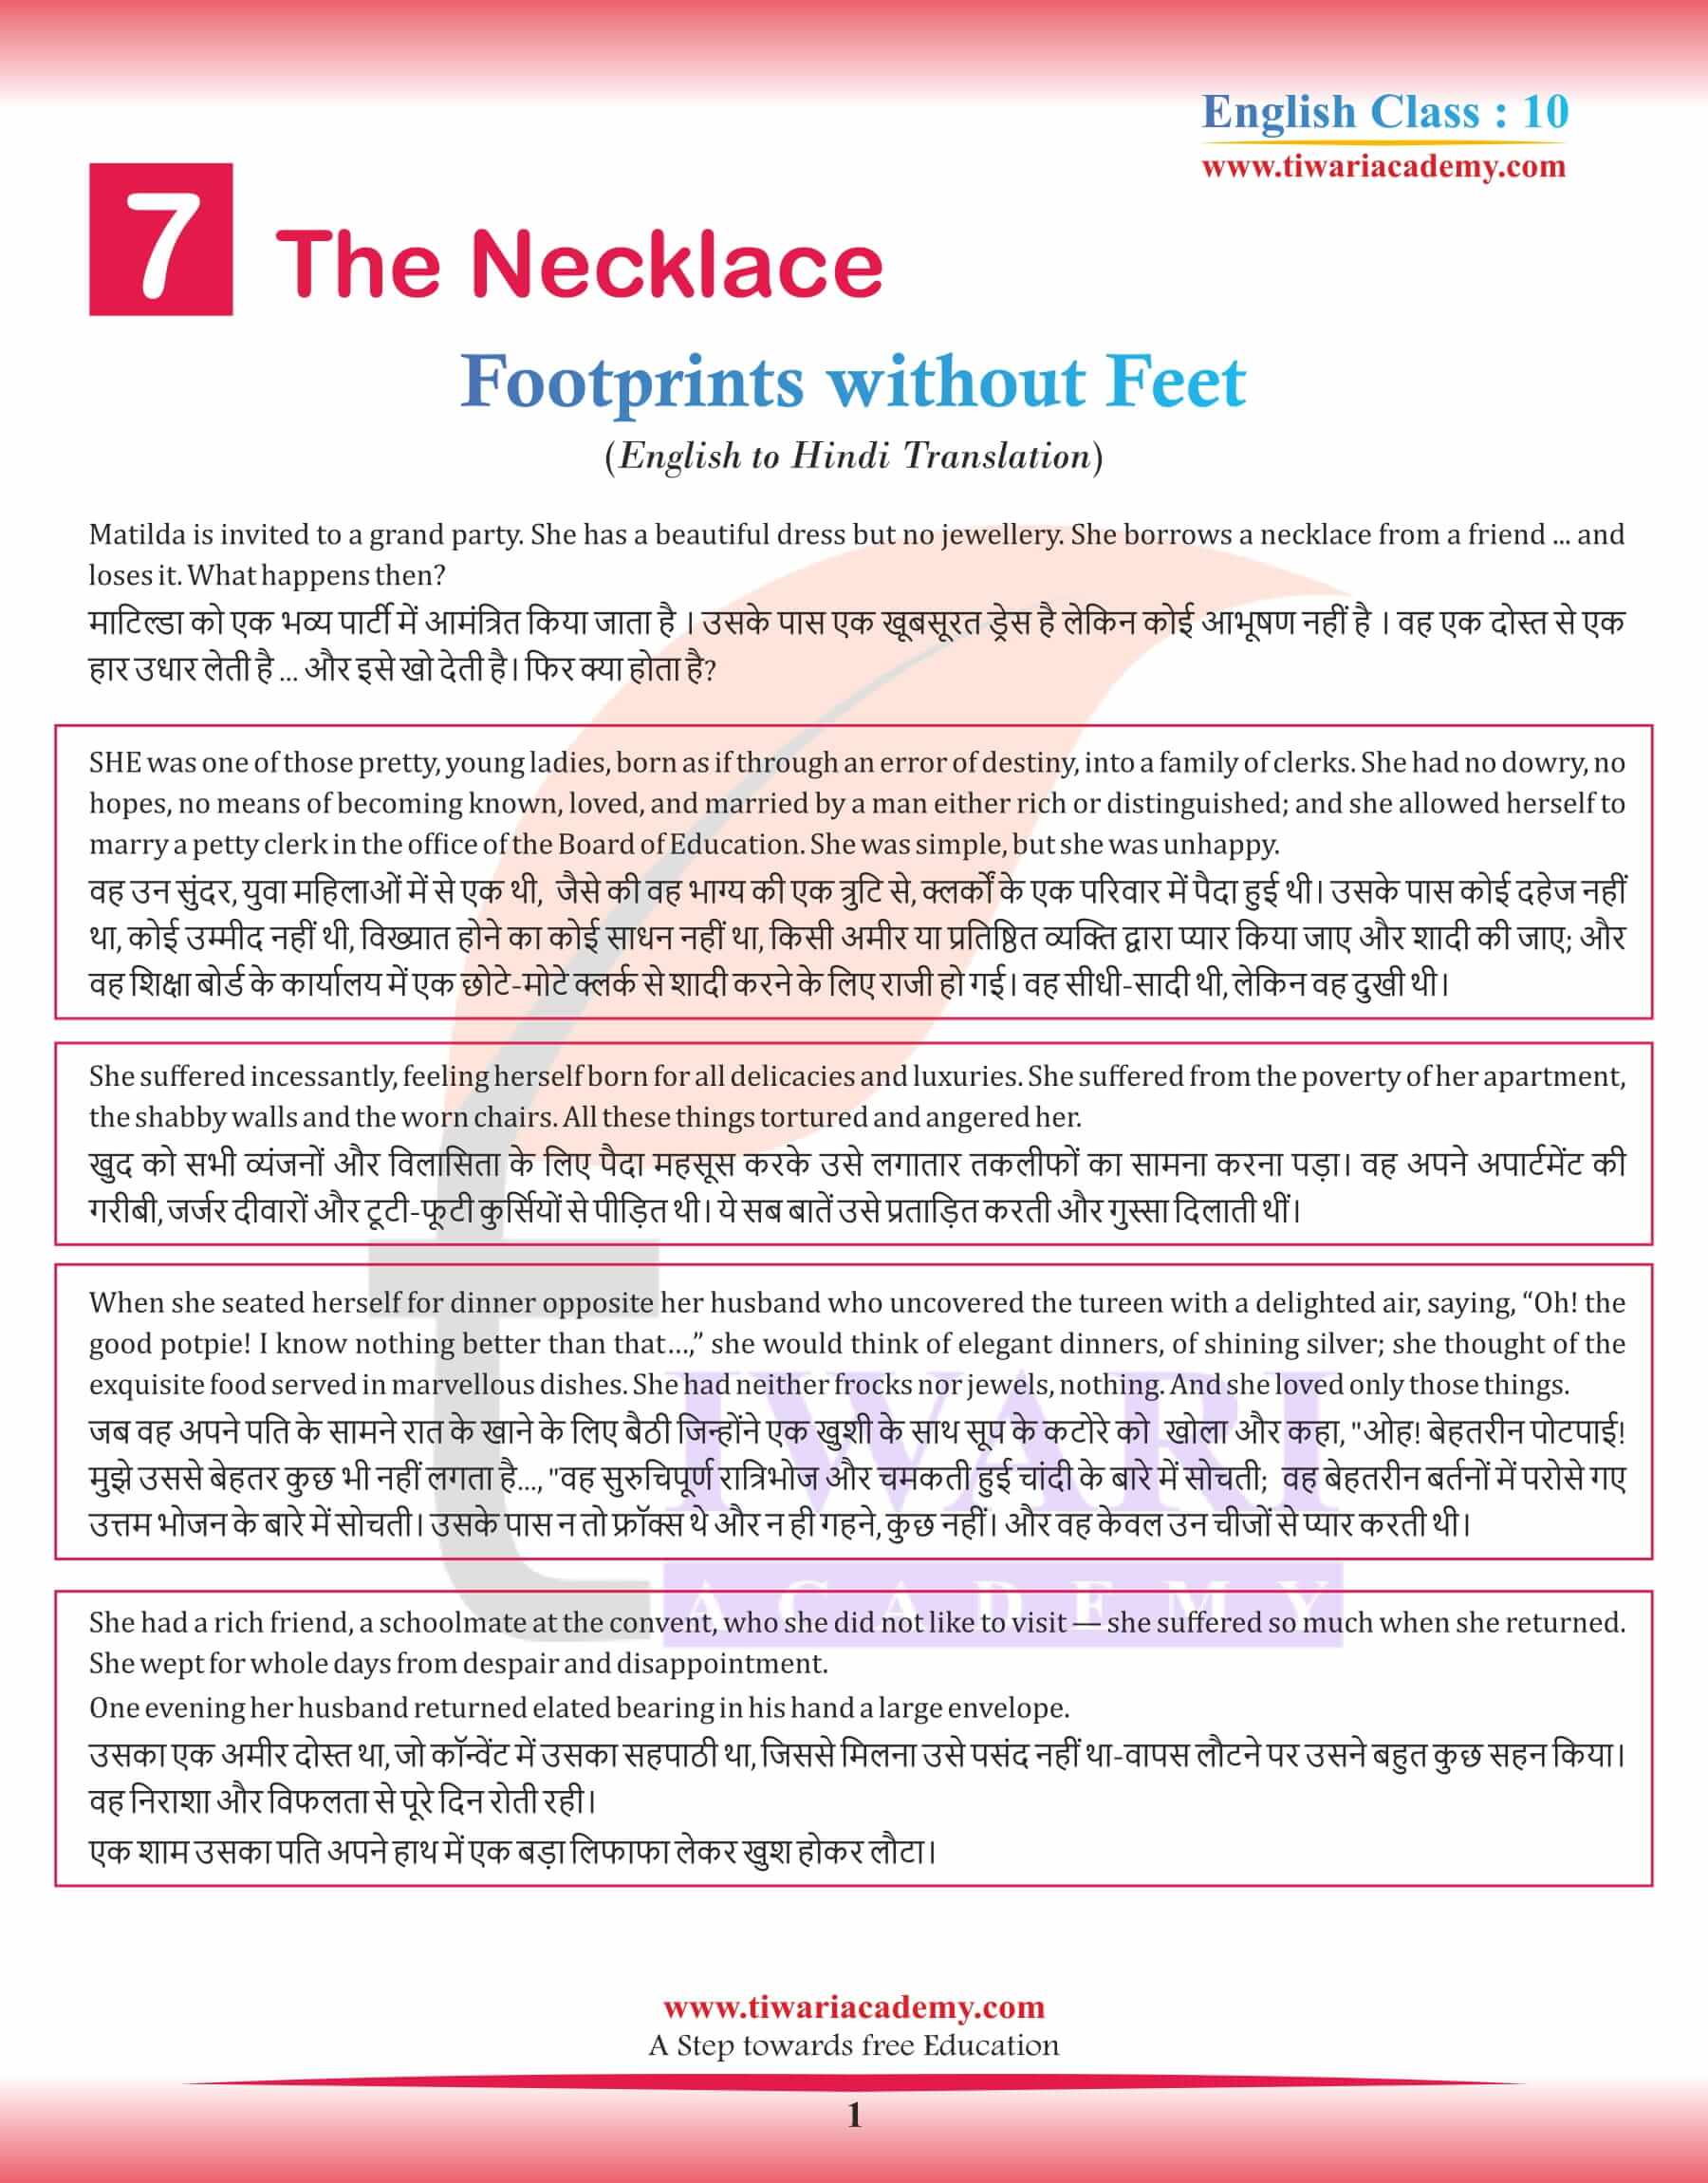 Class 10 English Supplementary Chapter 7 the Necklace